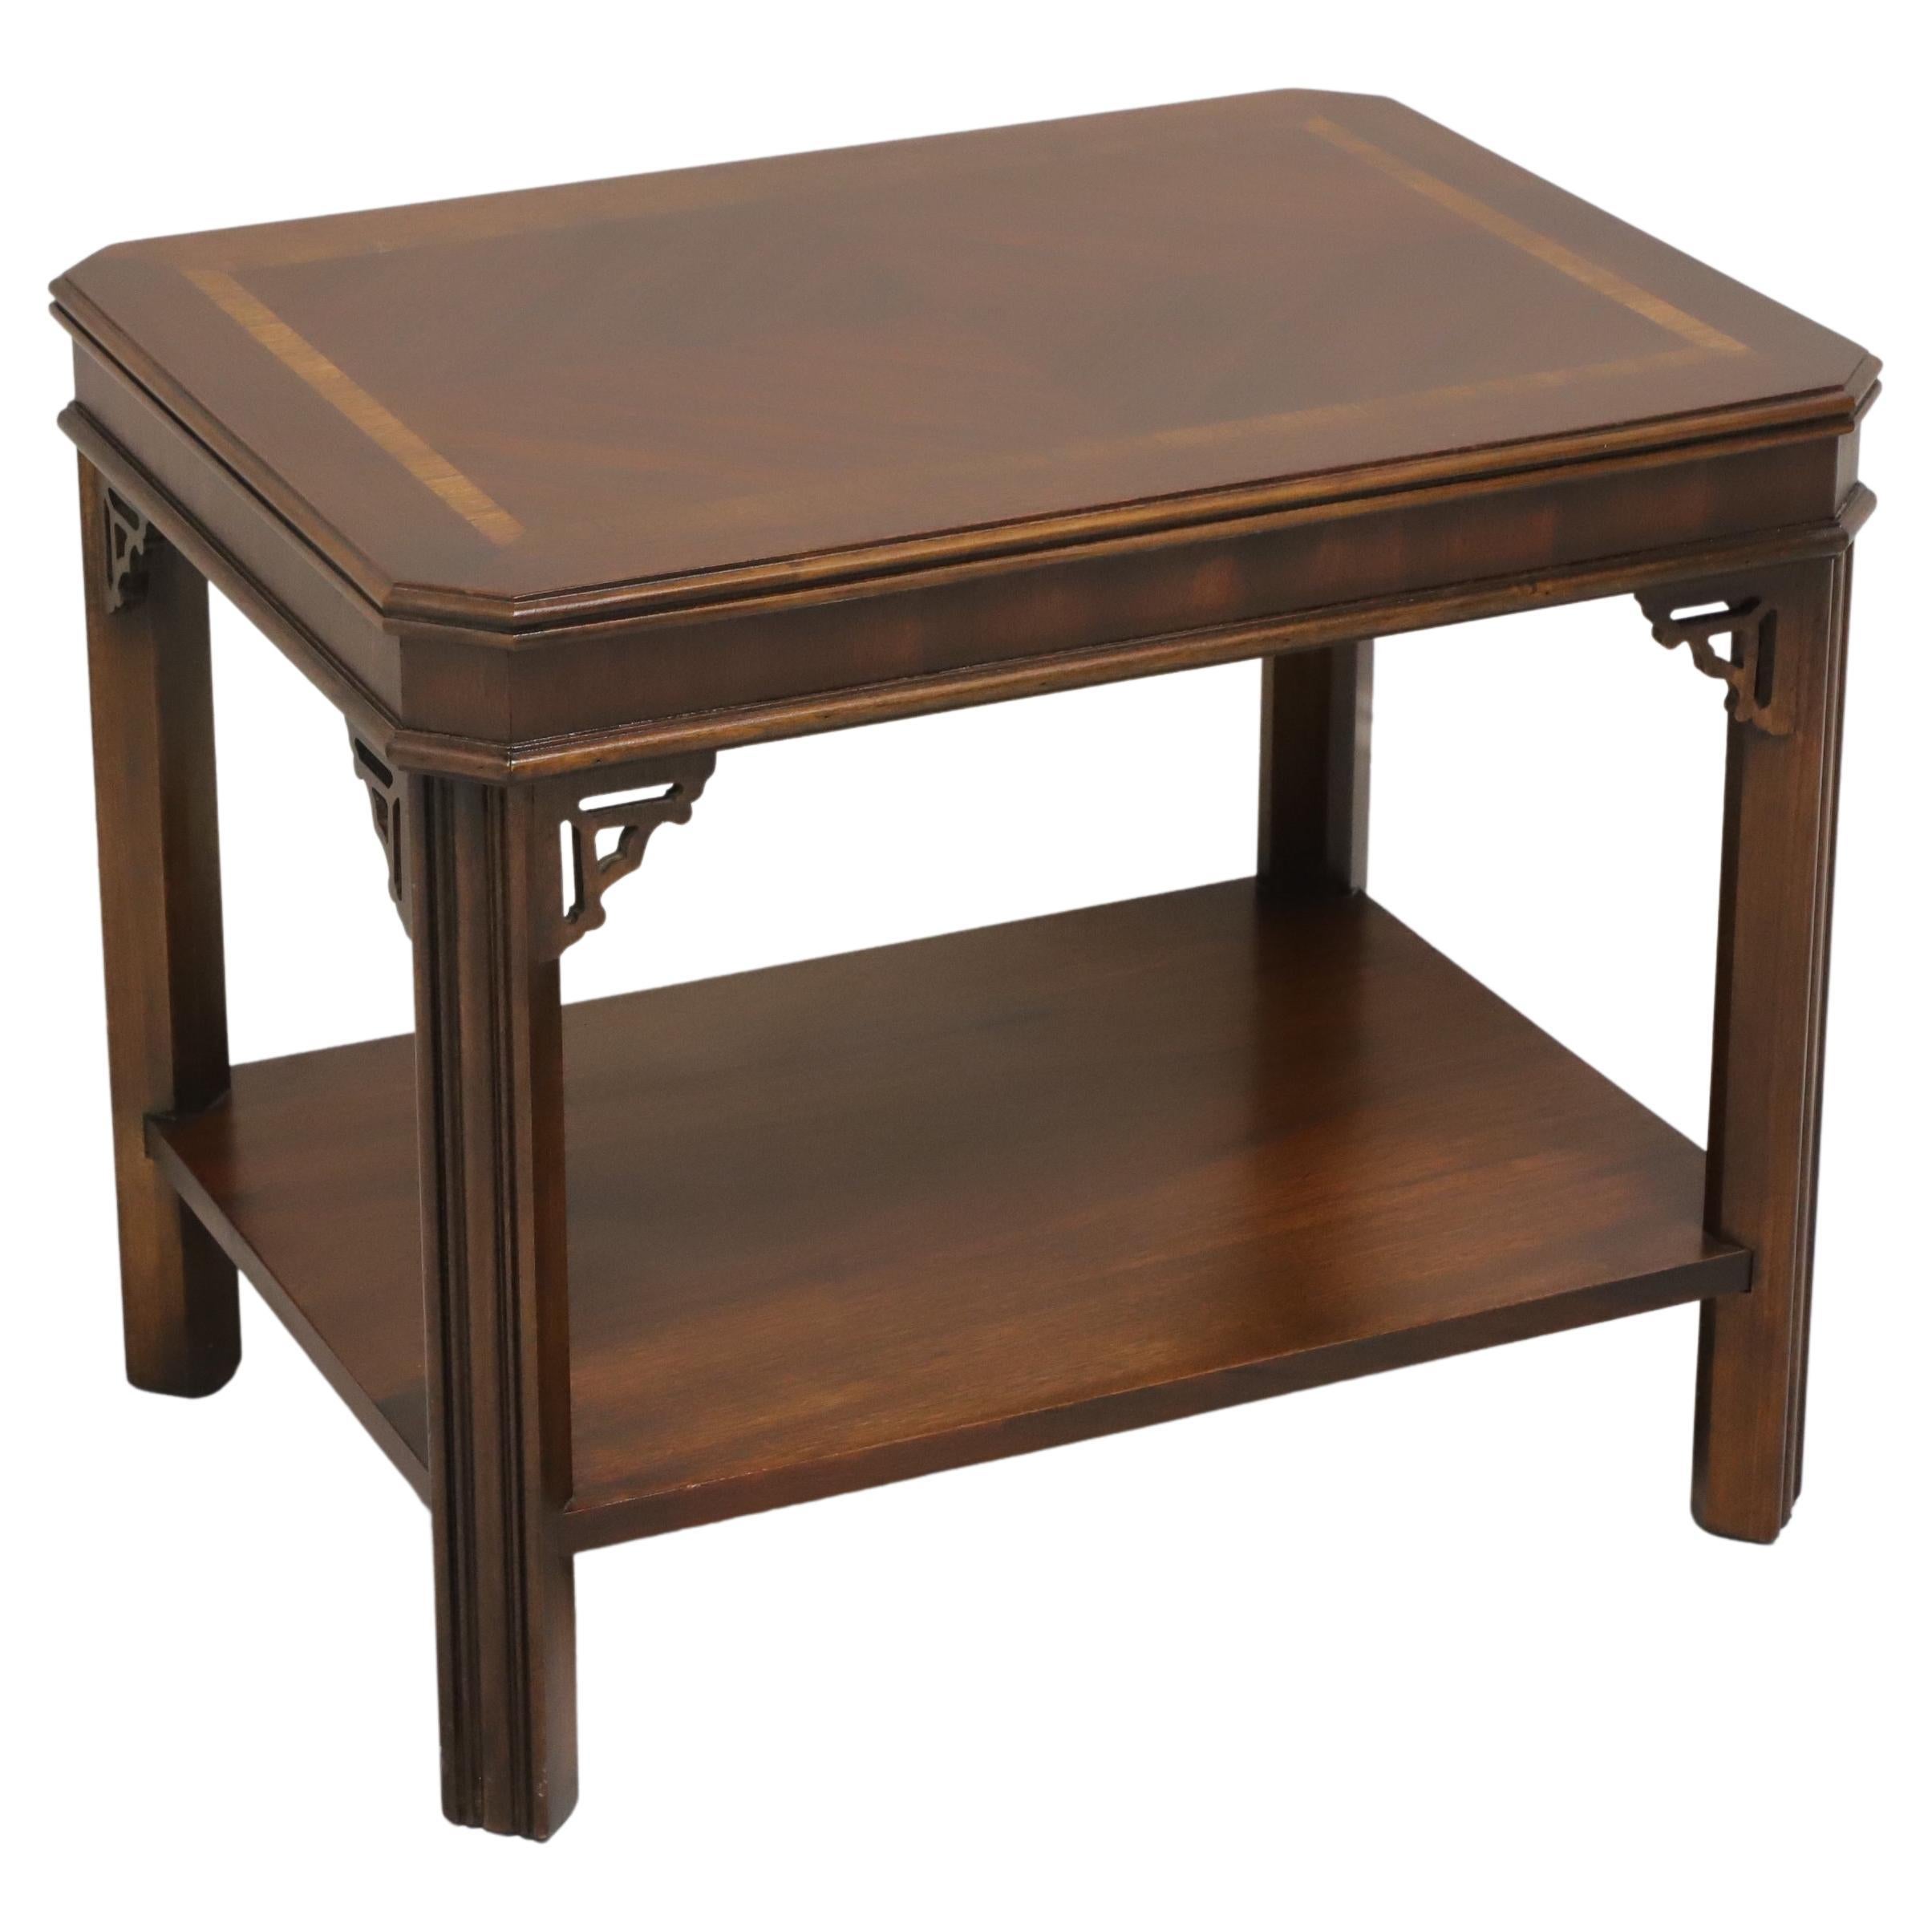 A Chippendale style side table by Lane Furniture. Mahogany with inlaid & banded top, bevel edge apron, fretwork accents to corner joints, a lower tier shelf, and fluted straight legs. Made in Altavista, Virginia, USA, in the late 20th century.